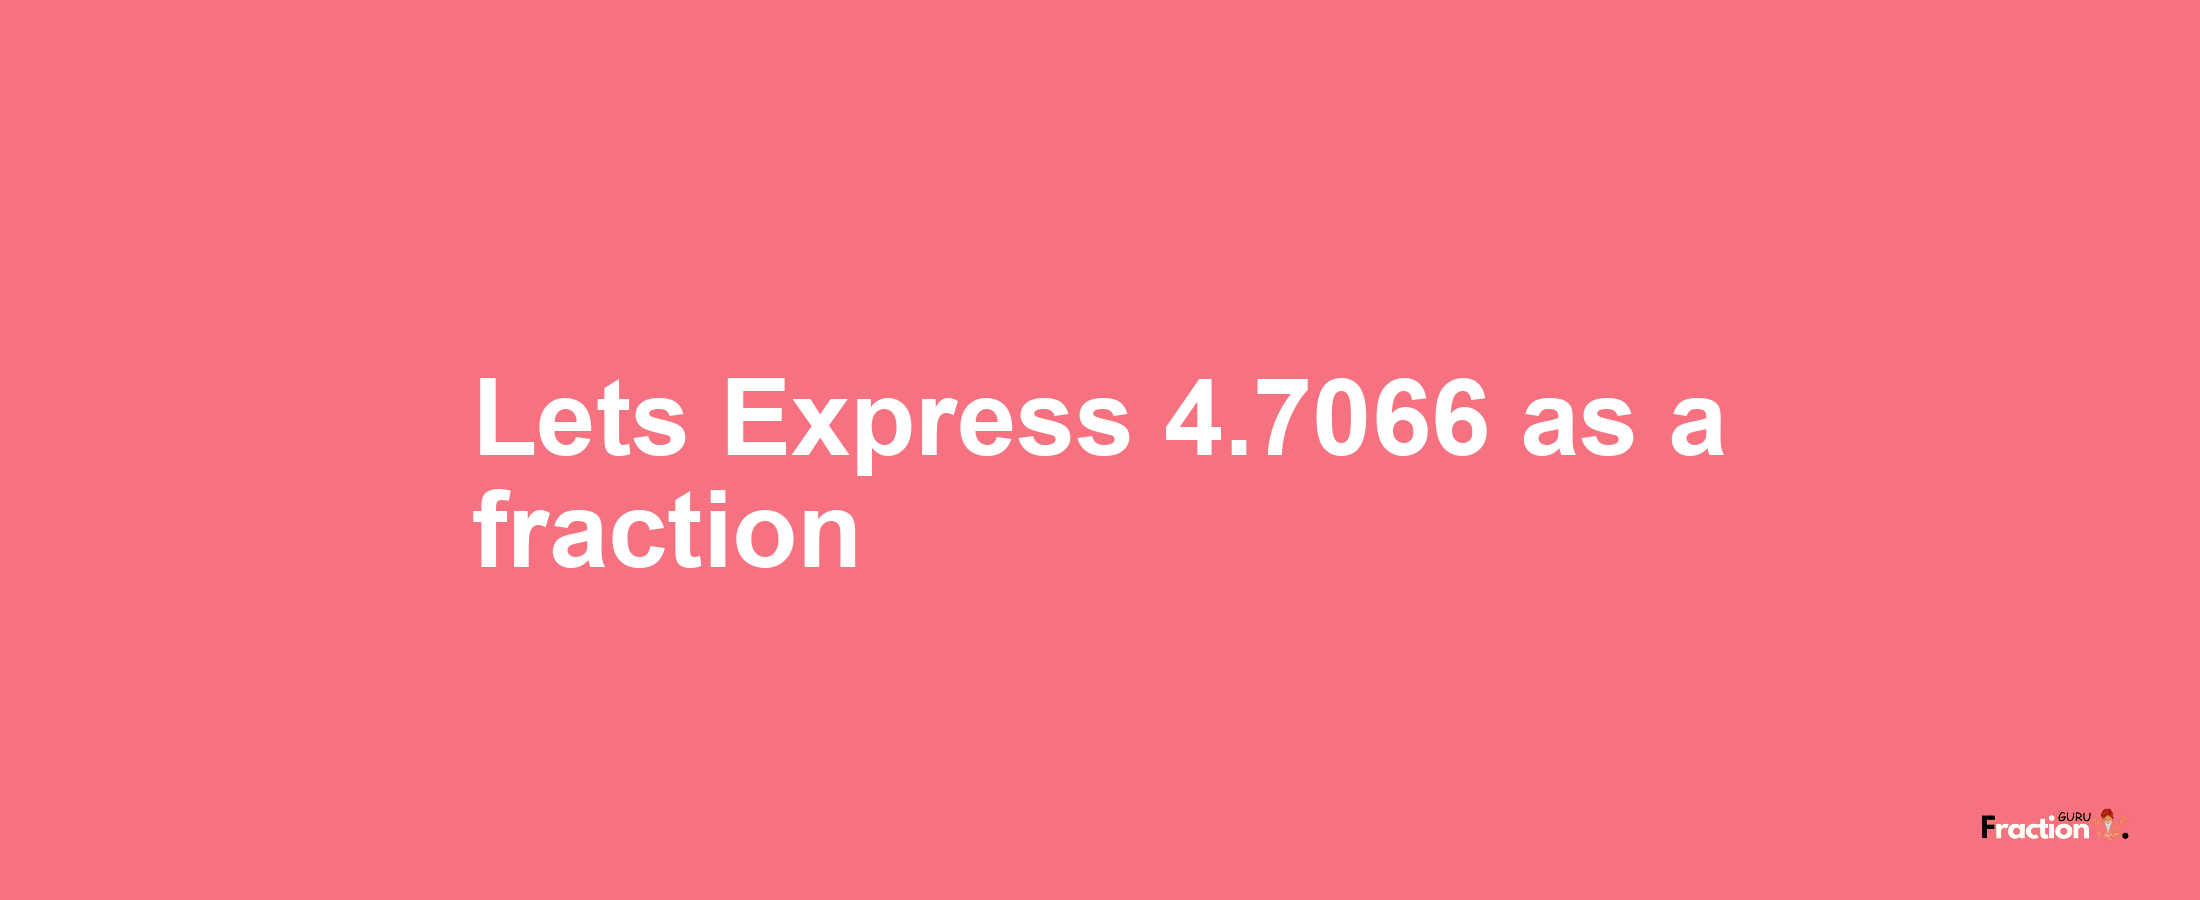 Lets Express 4.7066 as afraction